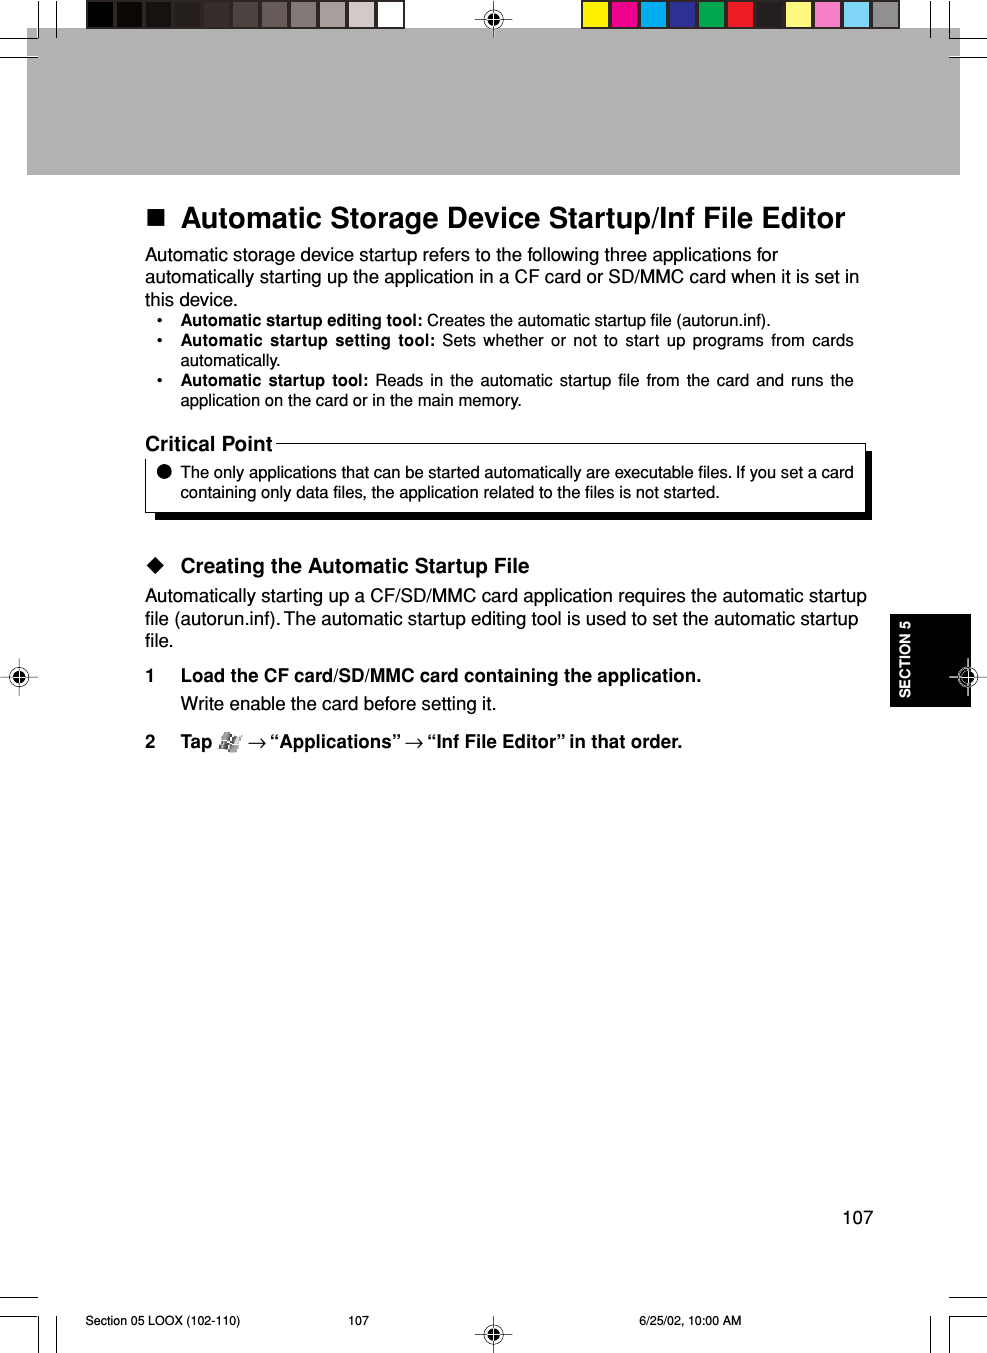 107SECTION 5Automatic Storage Device Startup/Inf File EditorAutomatic storage device startup refers to the following three applications forautomatically starting up the application in a CF card or SD/MMC card when it is set inthis device.•Automatic startup editing tool: Creates the automatic startup file (autorun.inf).•Automatic startup setting tool: Sets whether or not to start up programs from cardsautomatically.•Automatic startup tool: Reads in the automatic startup file from the card and runs theapplication on the card or in the main memory.Critical PointThe only applications that can be started automatically are executable files. If you set a cardcontaining only data files, the application related to the files is not started.Creating the Automatic Startup FileAutomatically starting up a CF/SD/MMC card application requires the automatic startupfile (autorun.inf). The automatic startup editing tool is used to set the automatic startupfile.1 Load the CF card/SD/MMC card containing the application.Write enable the card before setting it.2 Tap   → “Applications” → “Inf File Editor” in that order.Section 05 LOOX (102-110) 6/25/02, 10:00 AM107